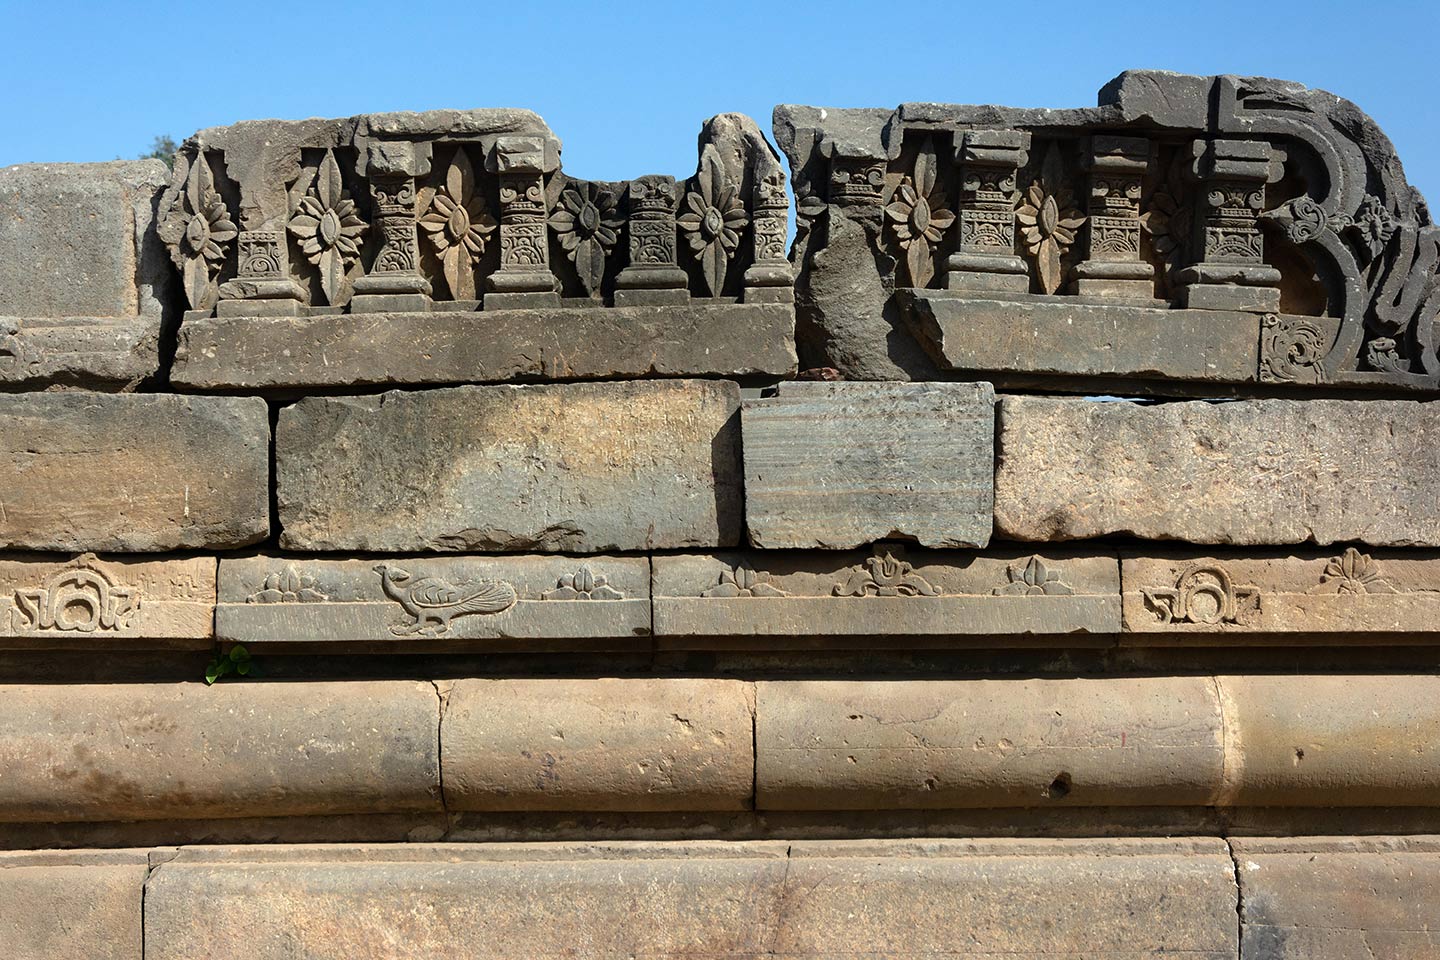 Broken fragments and debris from the original temple assembled on the adhisthana on the southeast side.